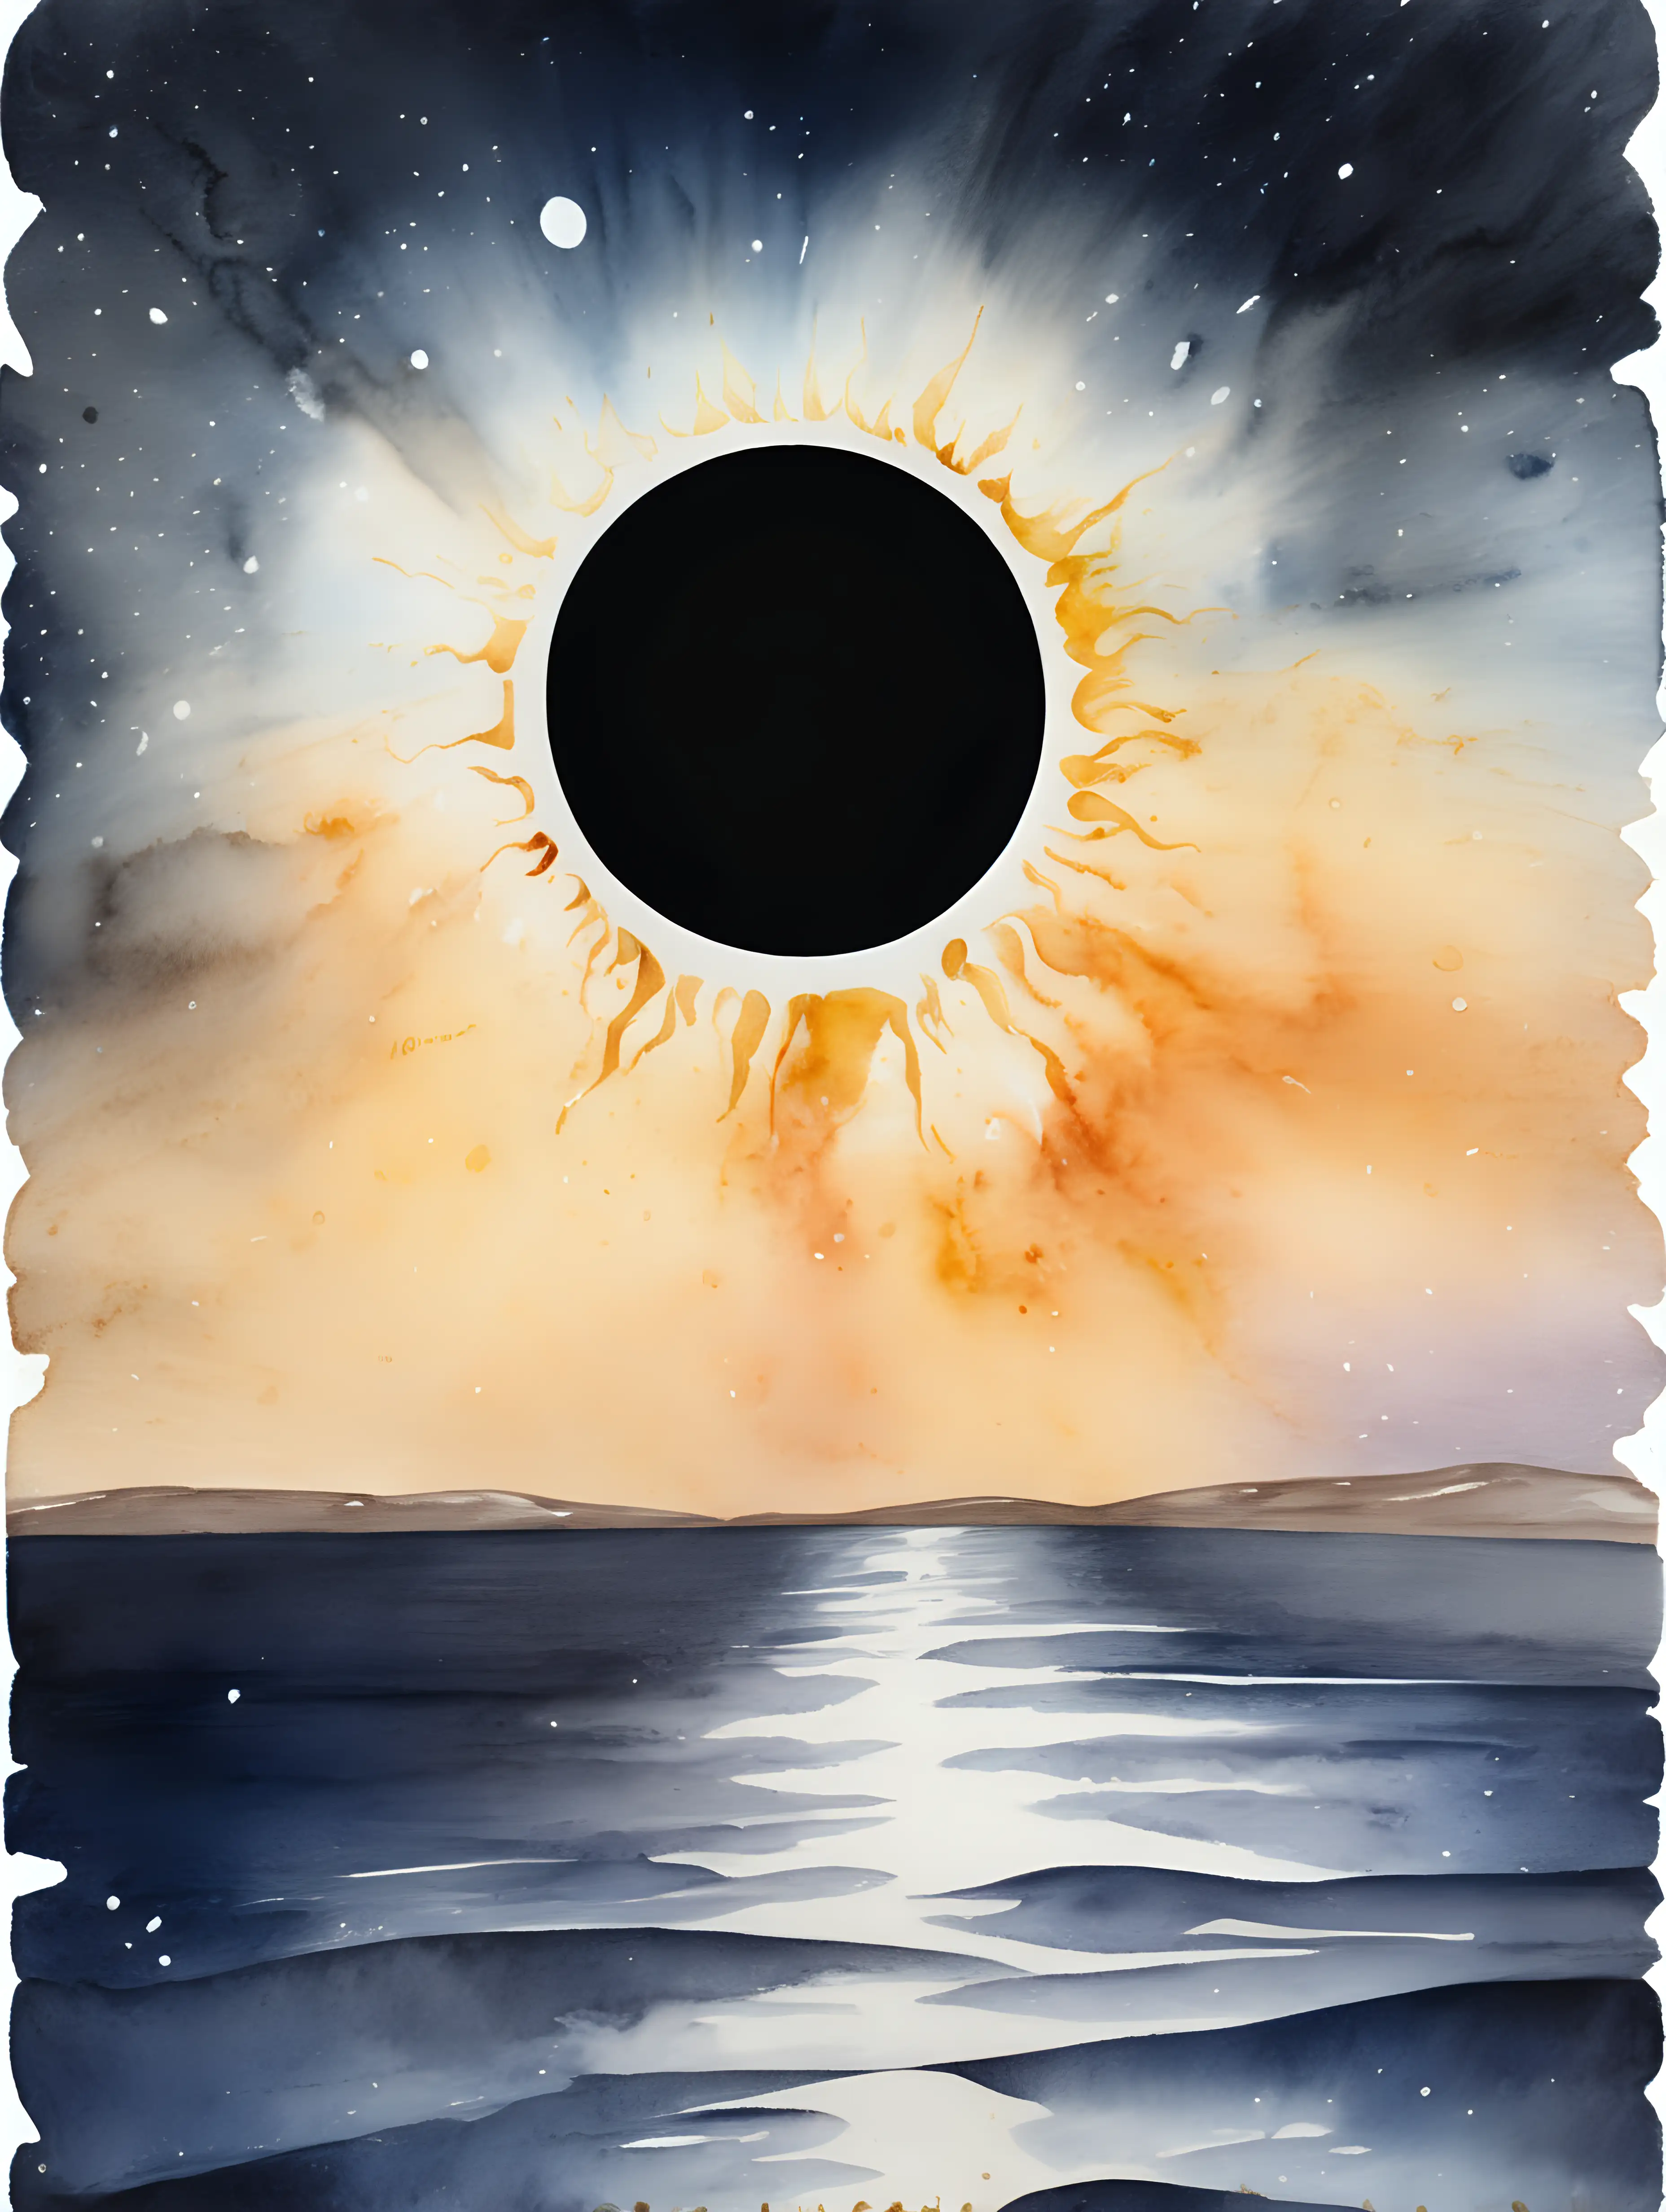 Isolated Large total solar eclipse in watercolor aesthetic all confined within frame border. Do not crop images. 



